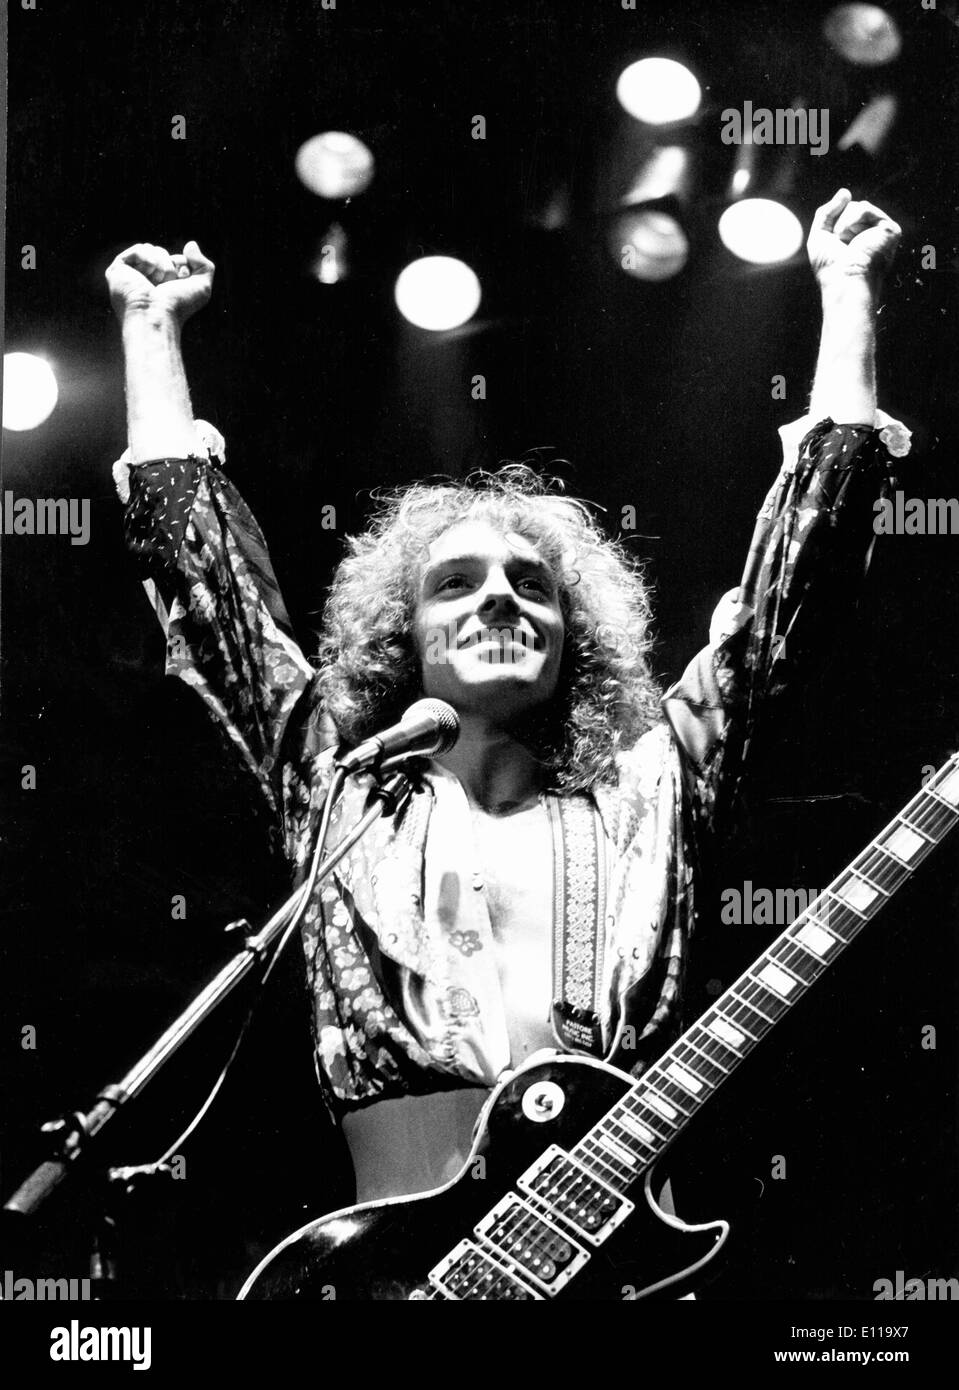 May 12, 1976; New York, NY, USA; One of the most respected guitar players of all time, PETER FRAMPTON has always made challenging, interesting, and critically acclaimed albums. Beginning with British bands The Herd and Humble Pie, Frampton quickly cemented his status as a world-class guitar god. Commercial success struck big in 1976 when his immortal Frampton Comes Alive! quickly became the biggest selling album of all time. The picture shows Peter during a performance in New York. Stock Photo